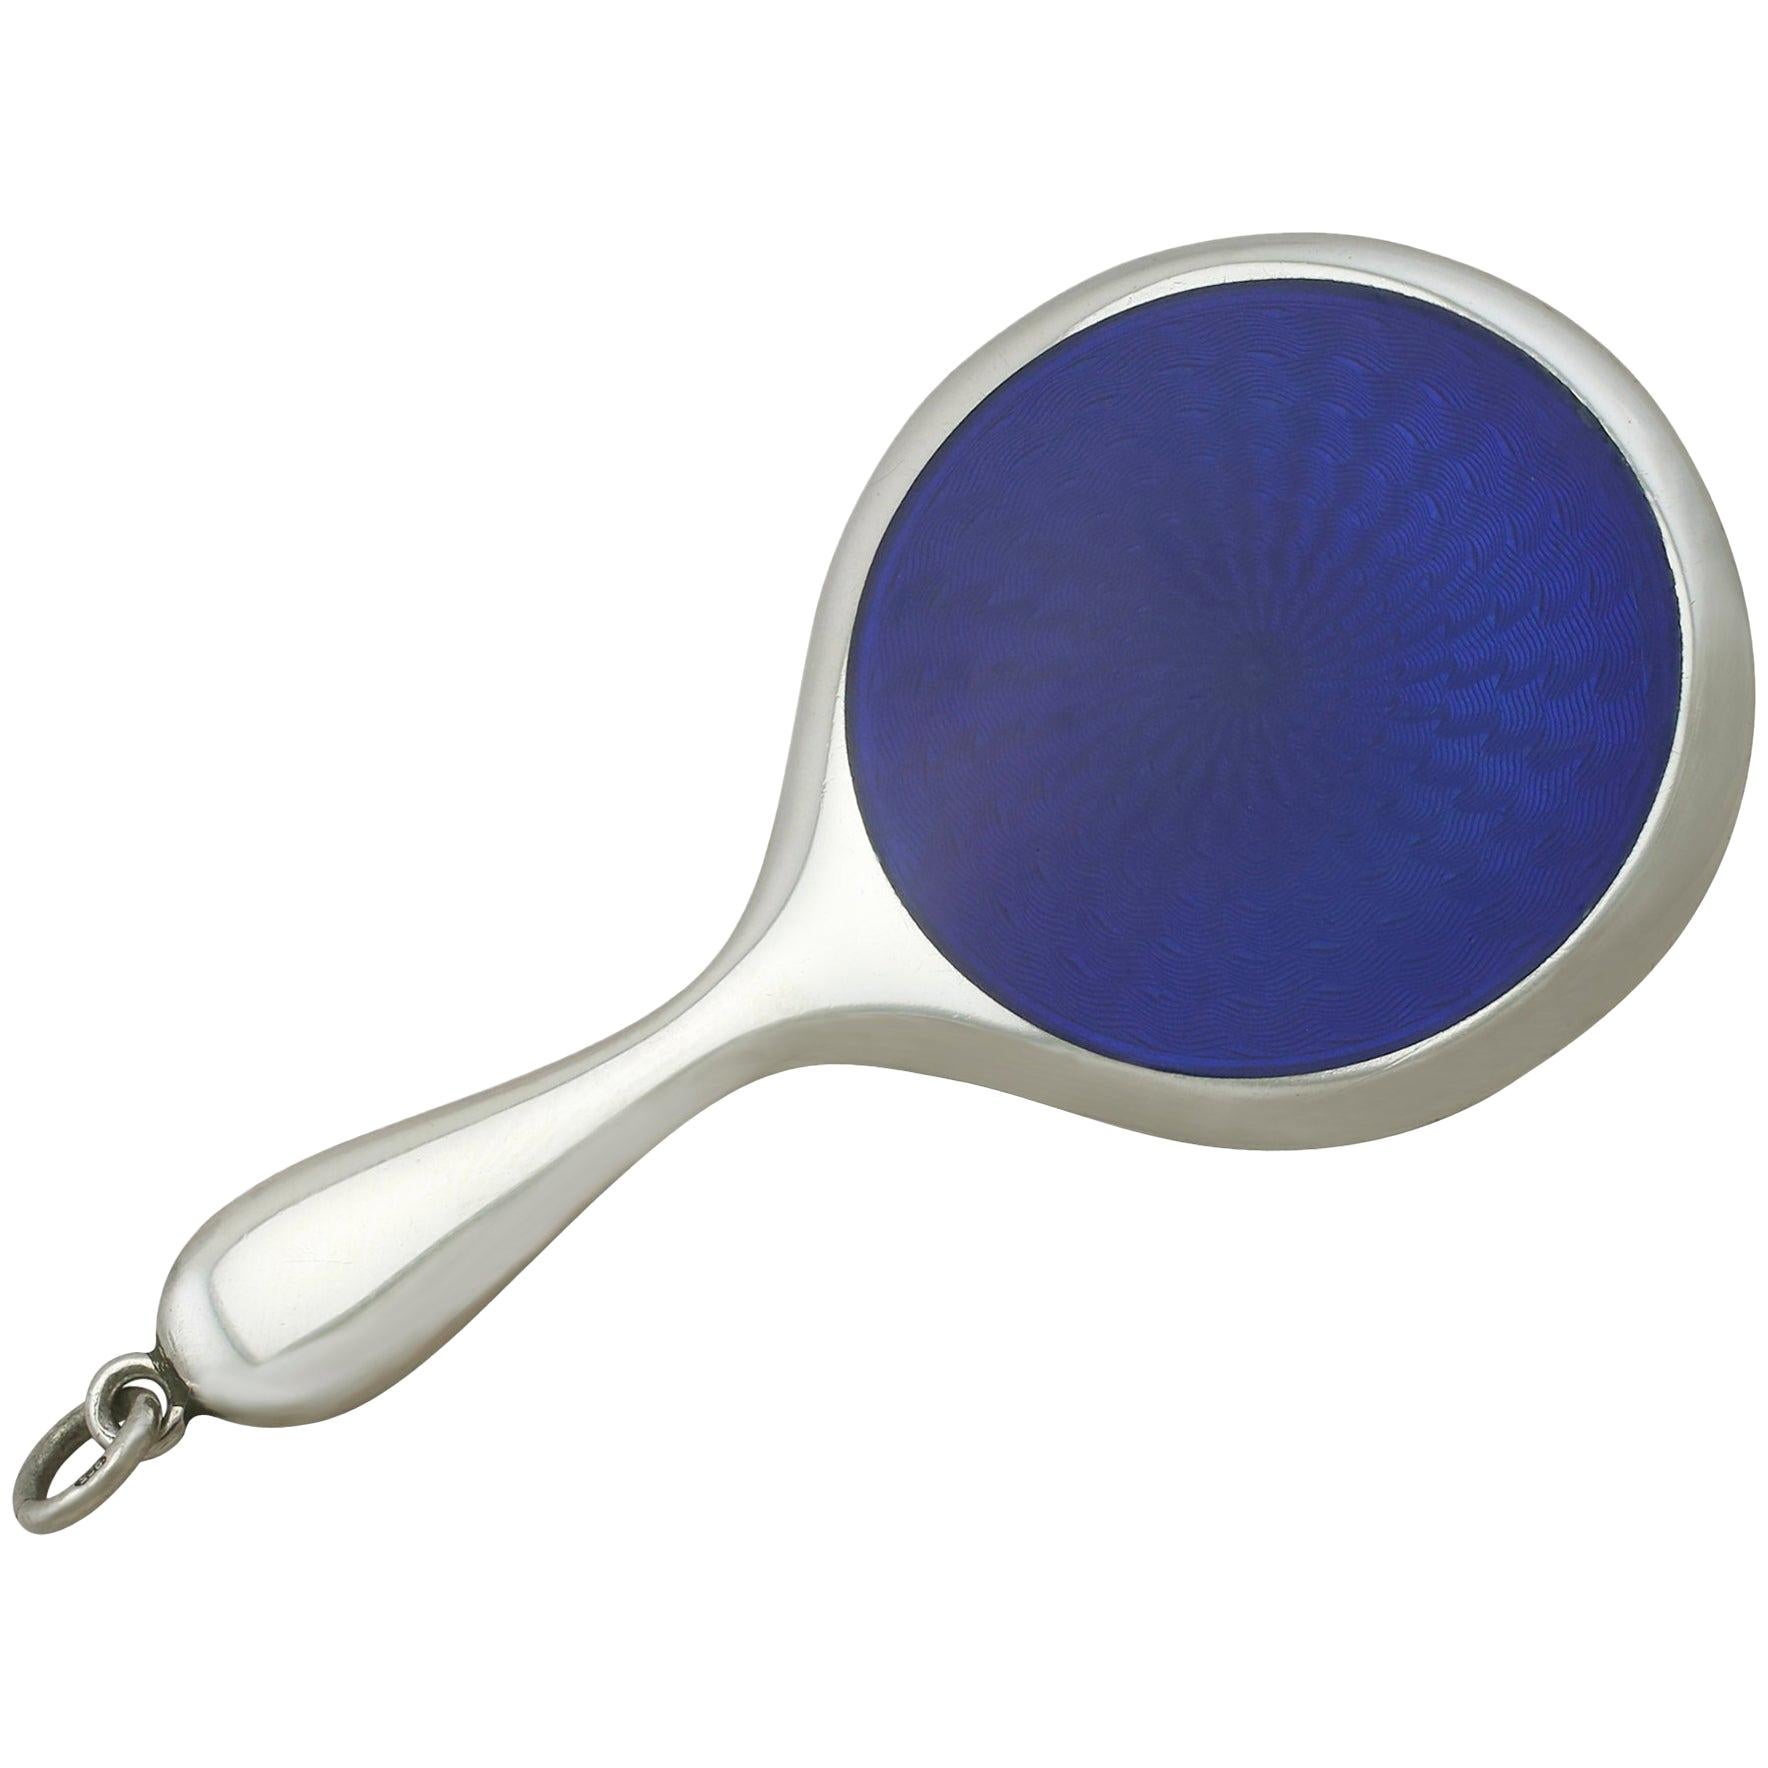 1900s Edwardian Sterling Silver and Enamel Miniature Hand Mirror